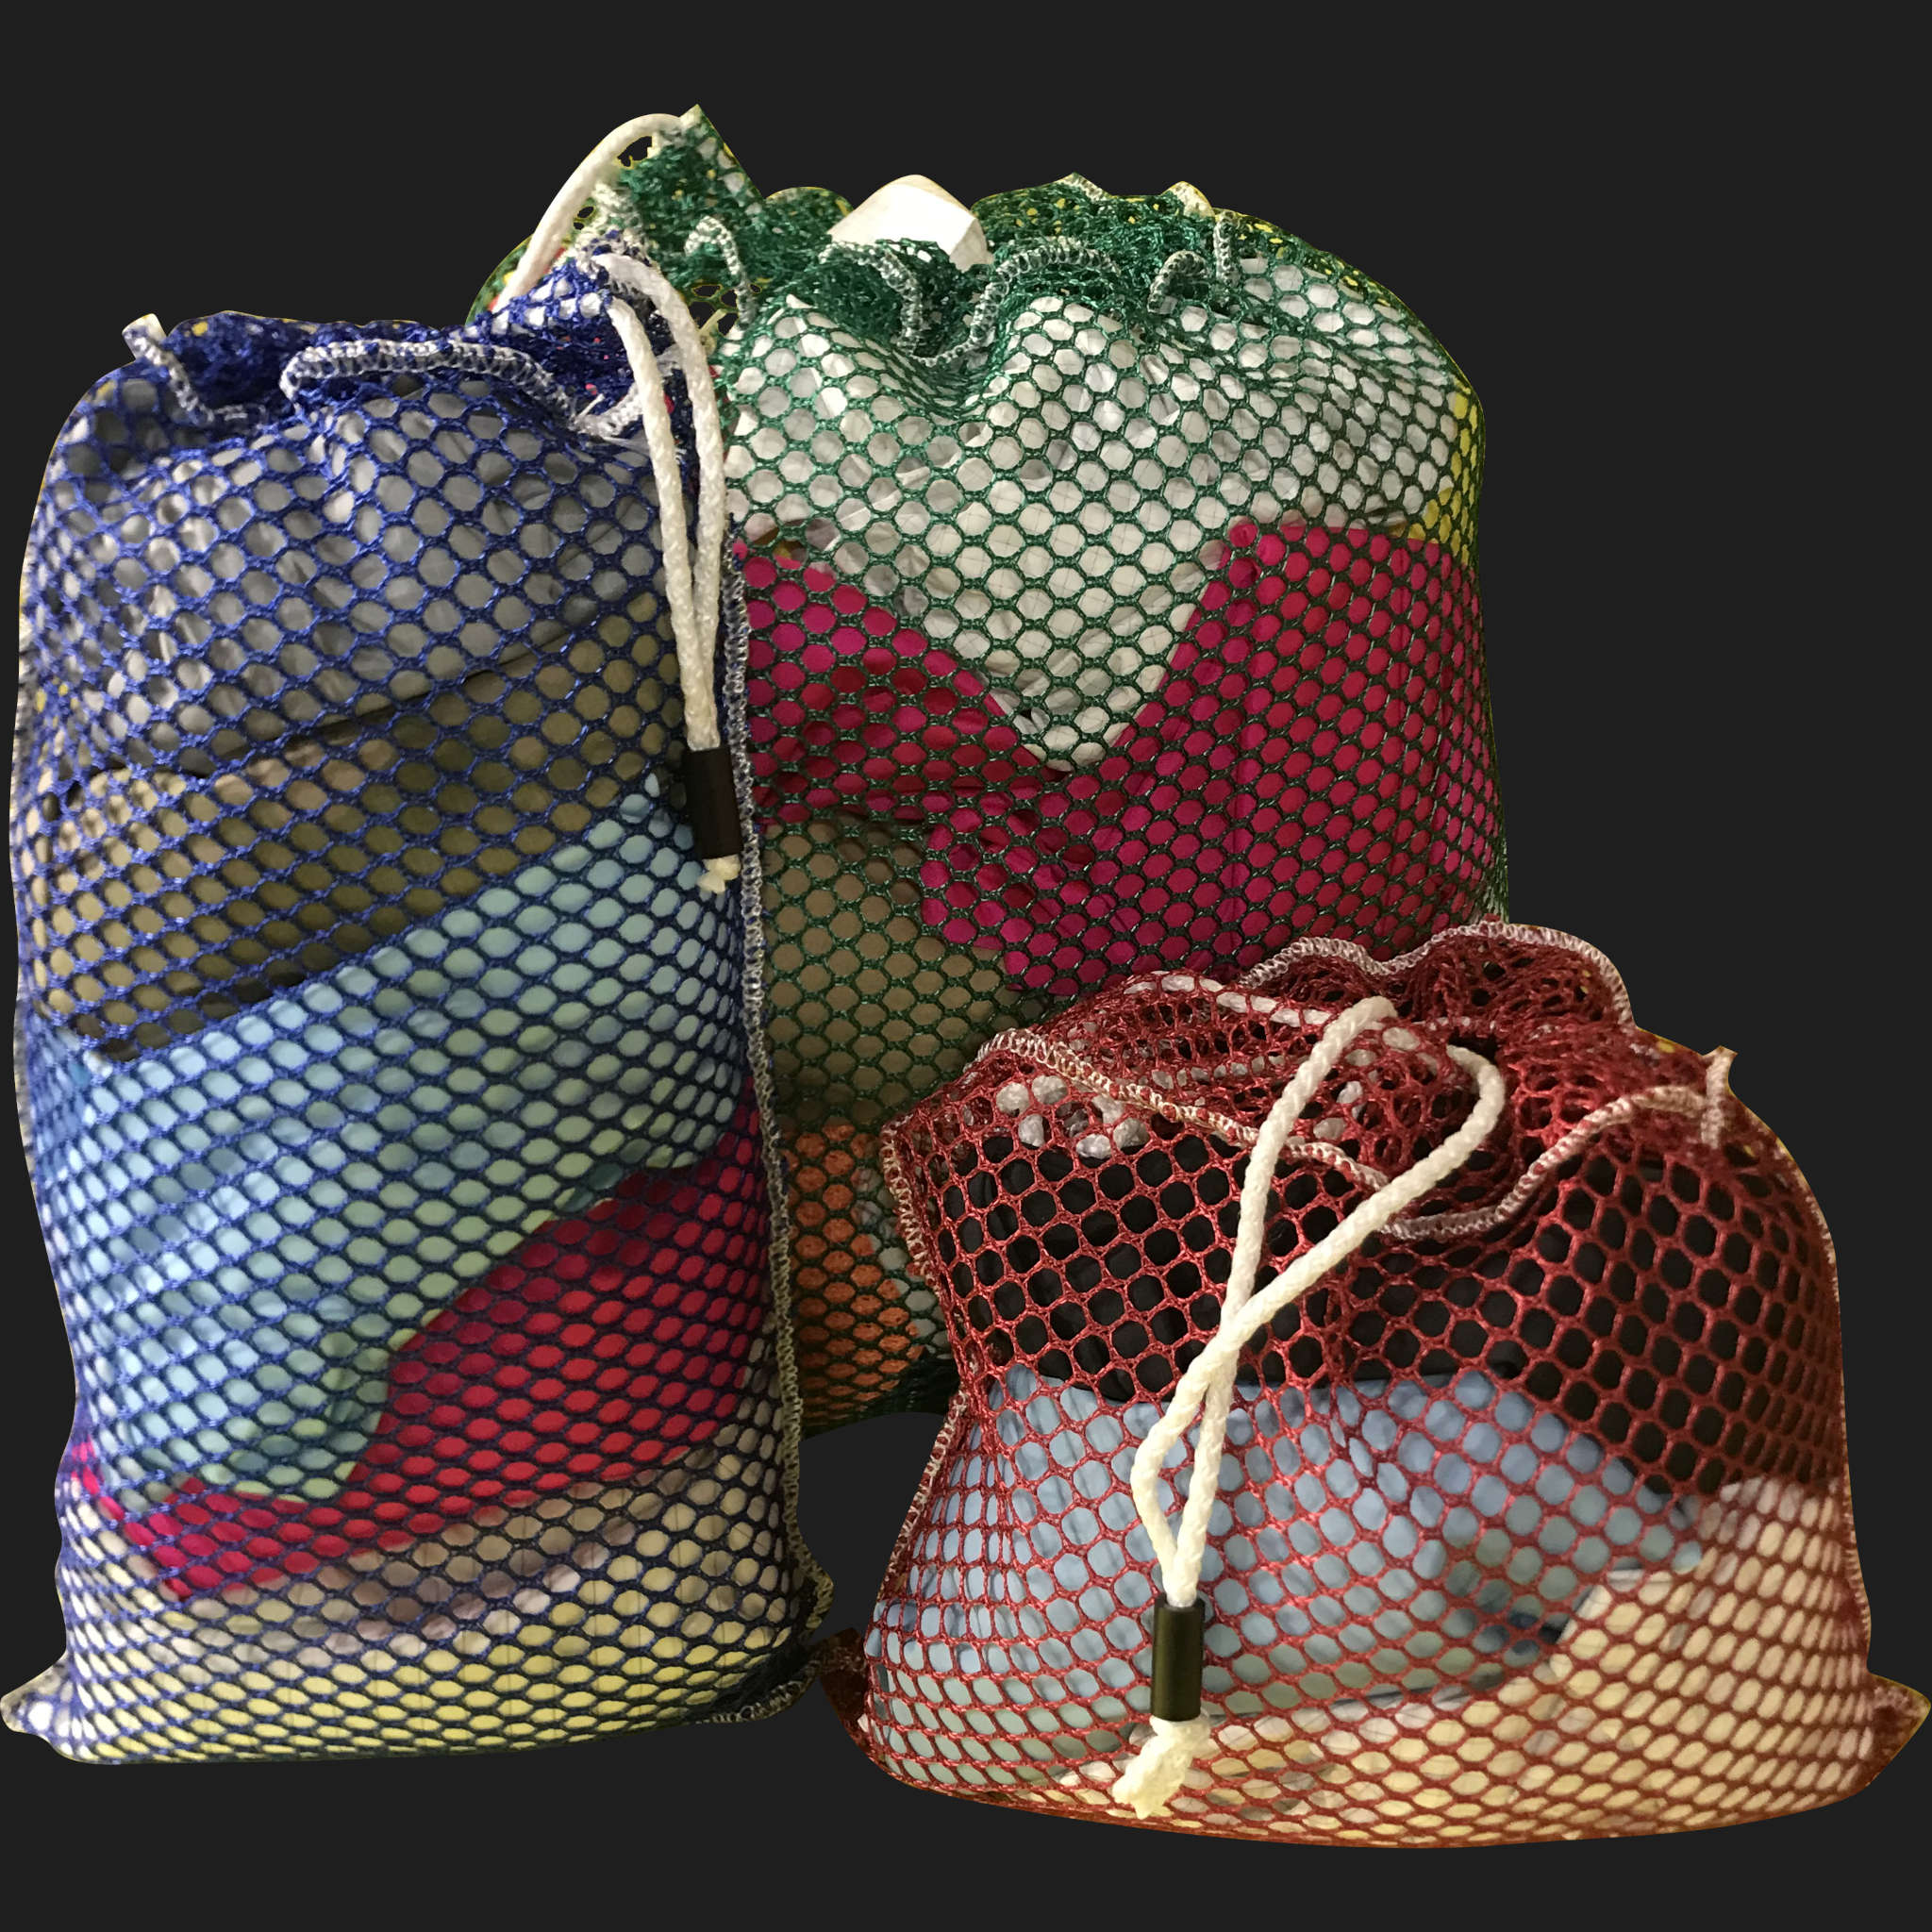 18" x 36" Customized Mesh-Net-Laundry Bags Heavy Duty with Cord and barrellock closure